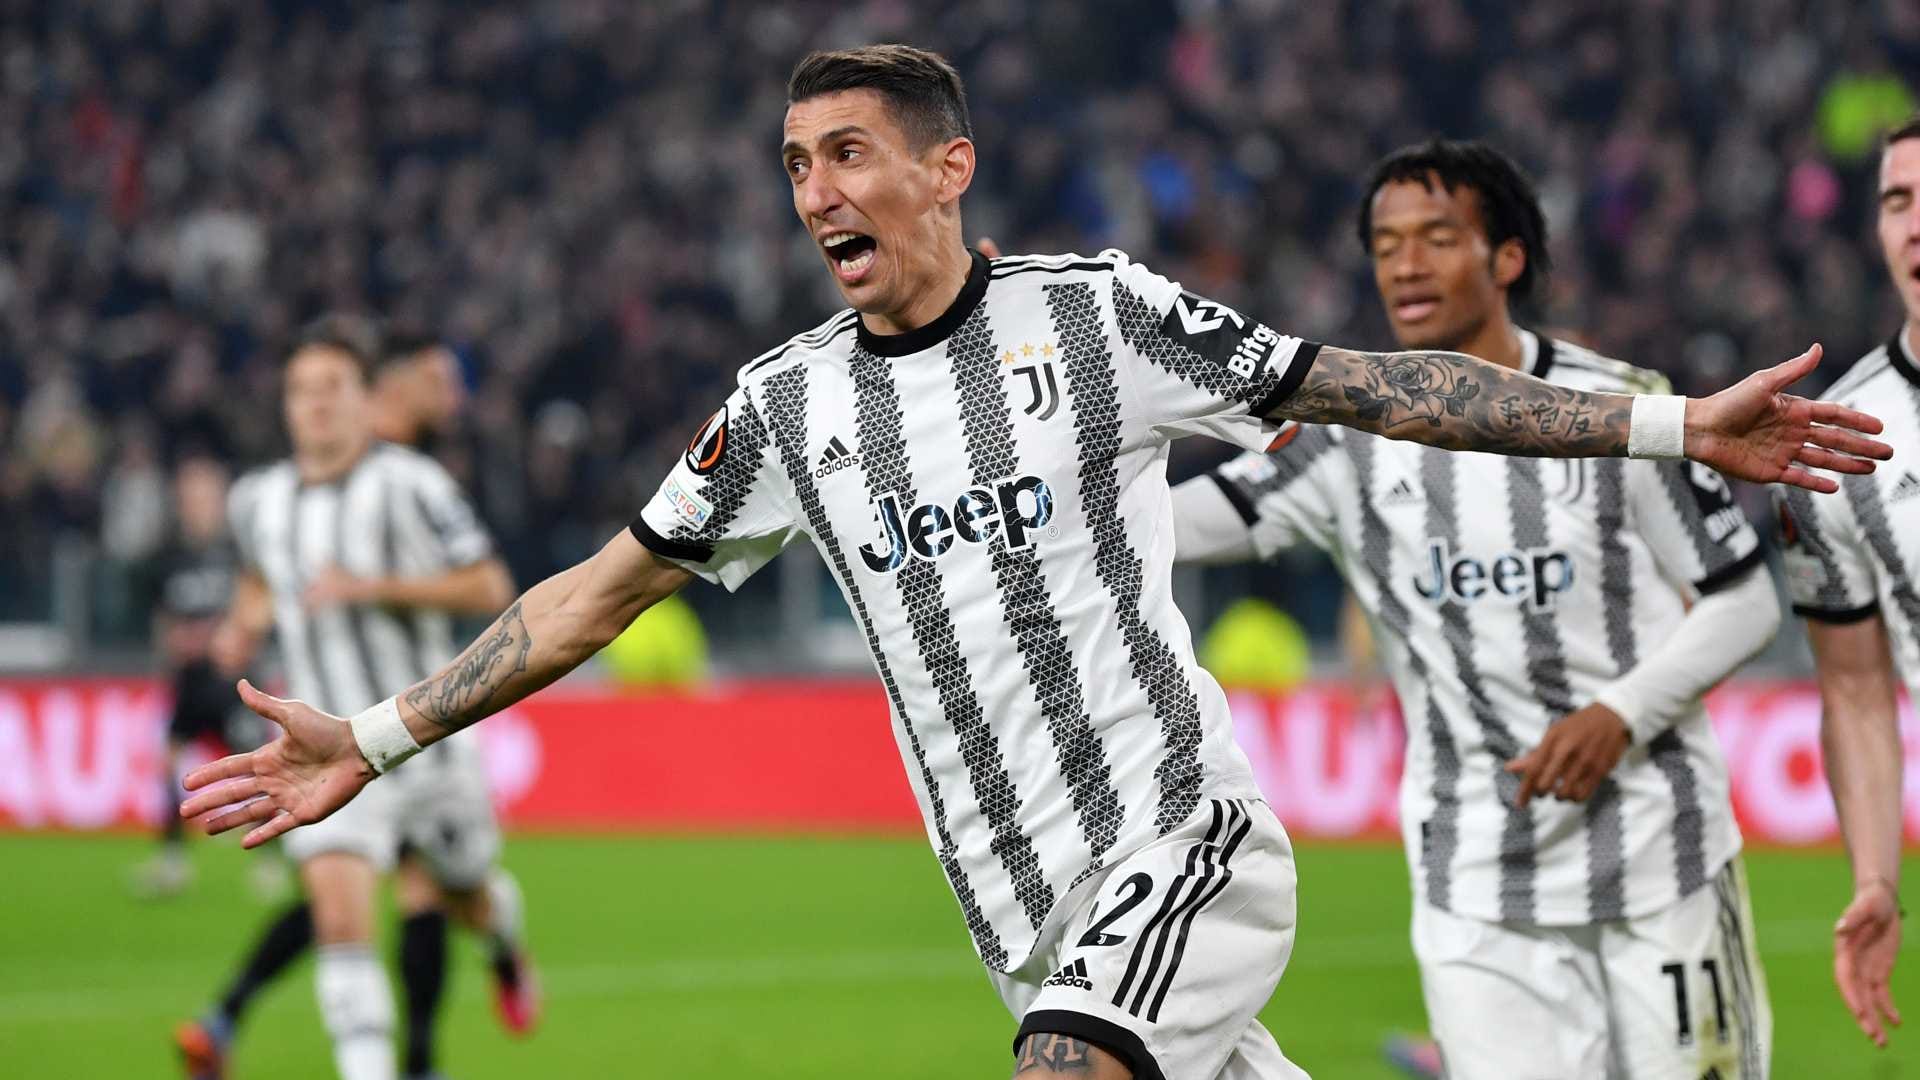 Juventus vs Verona Where to watch the match online, live stream, TV channels and kick-off time Goal